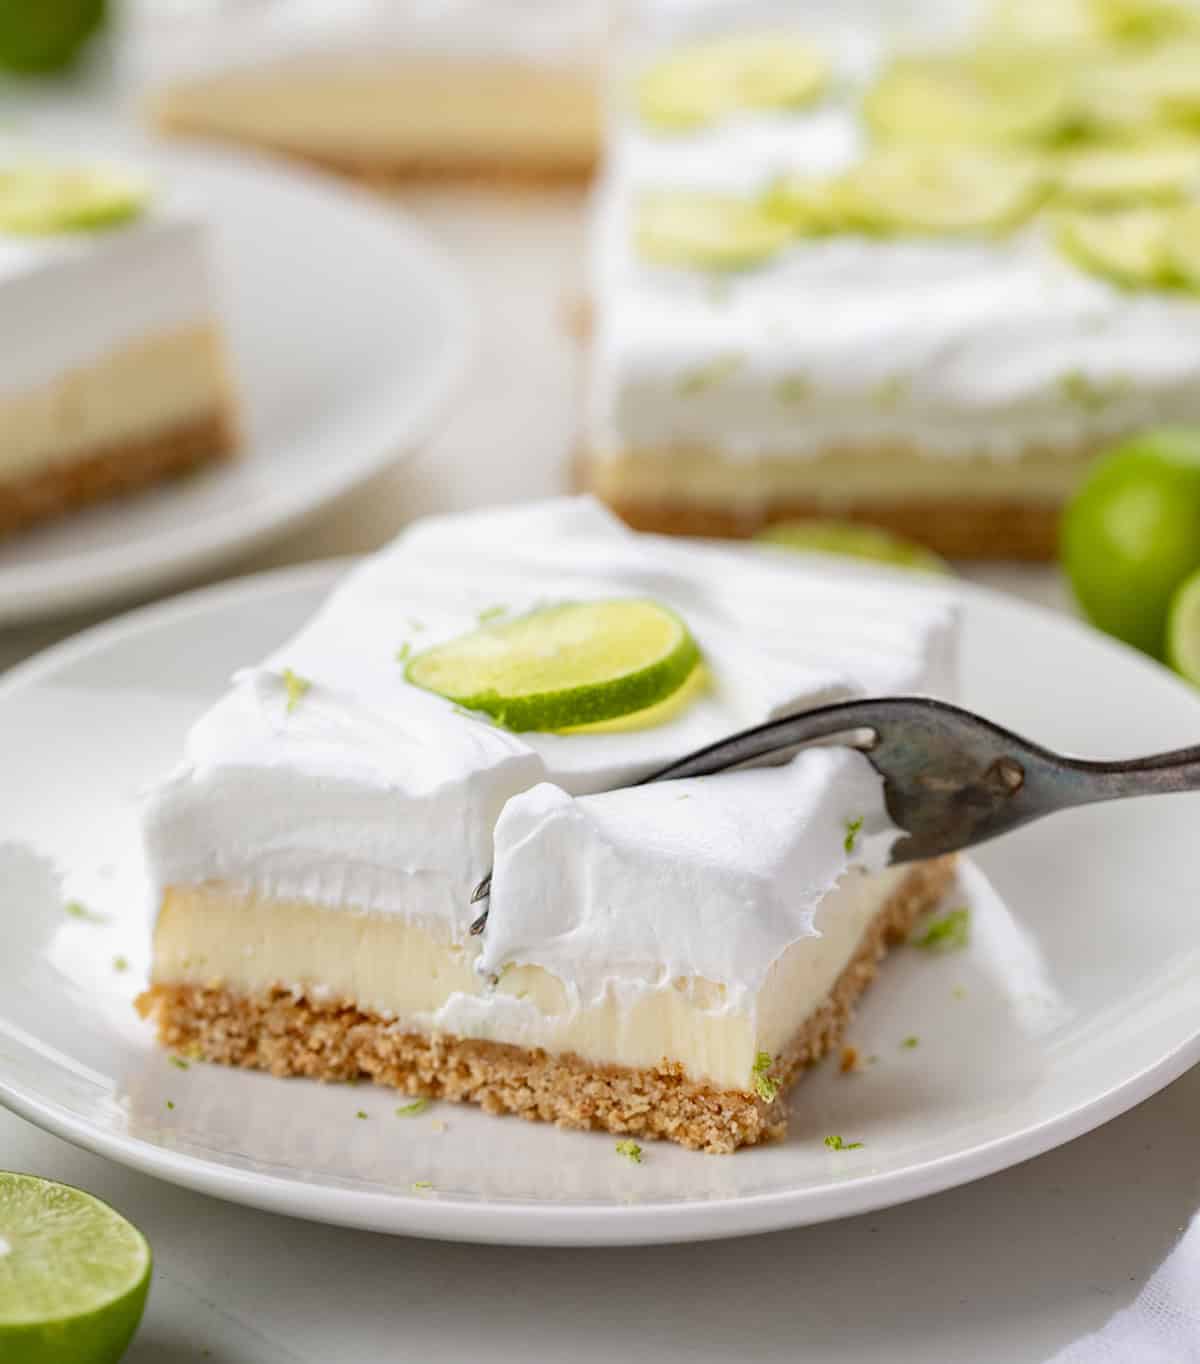 One Key Lime Pie Bar on a white plate with a fork taking a bite.